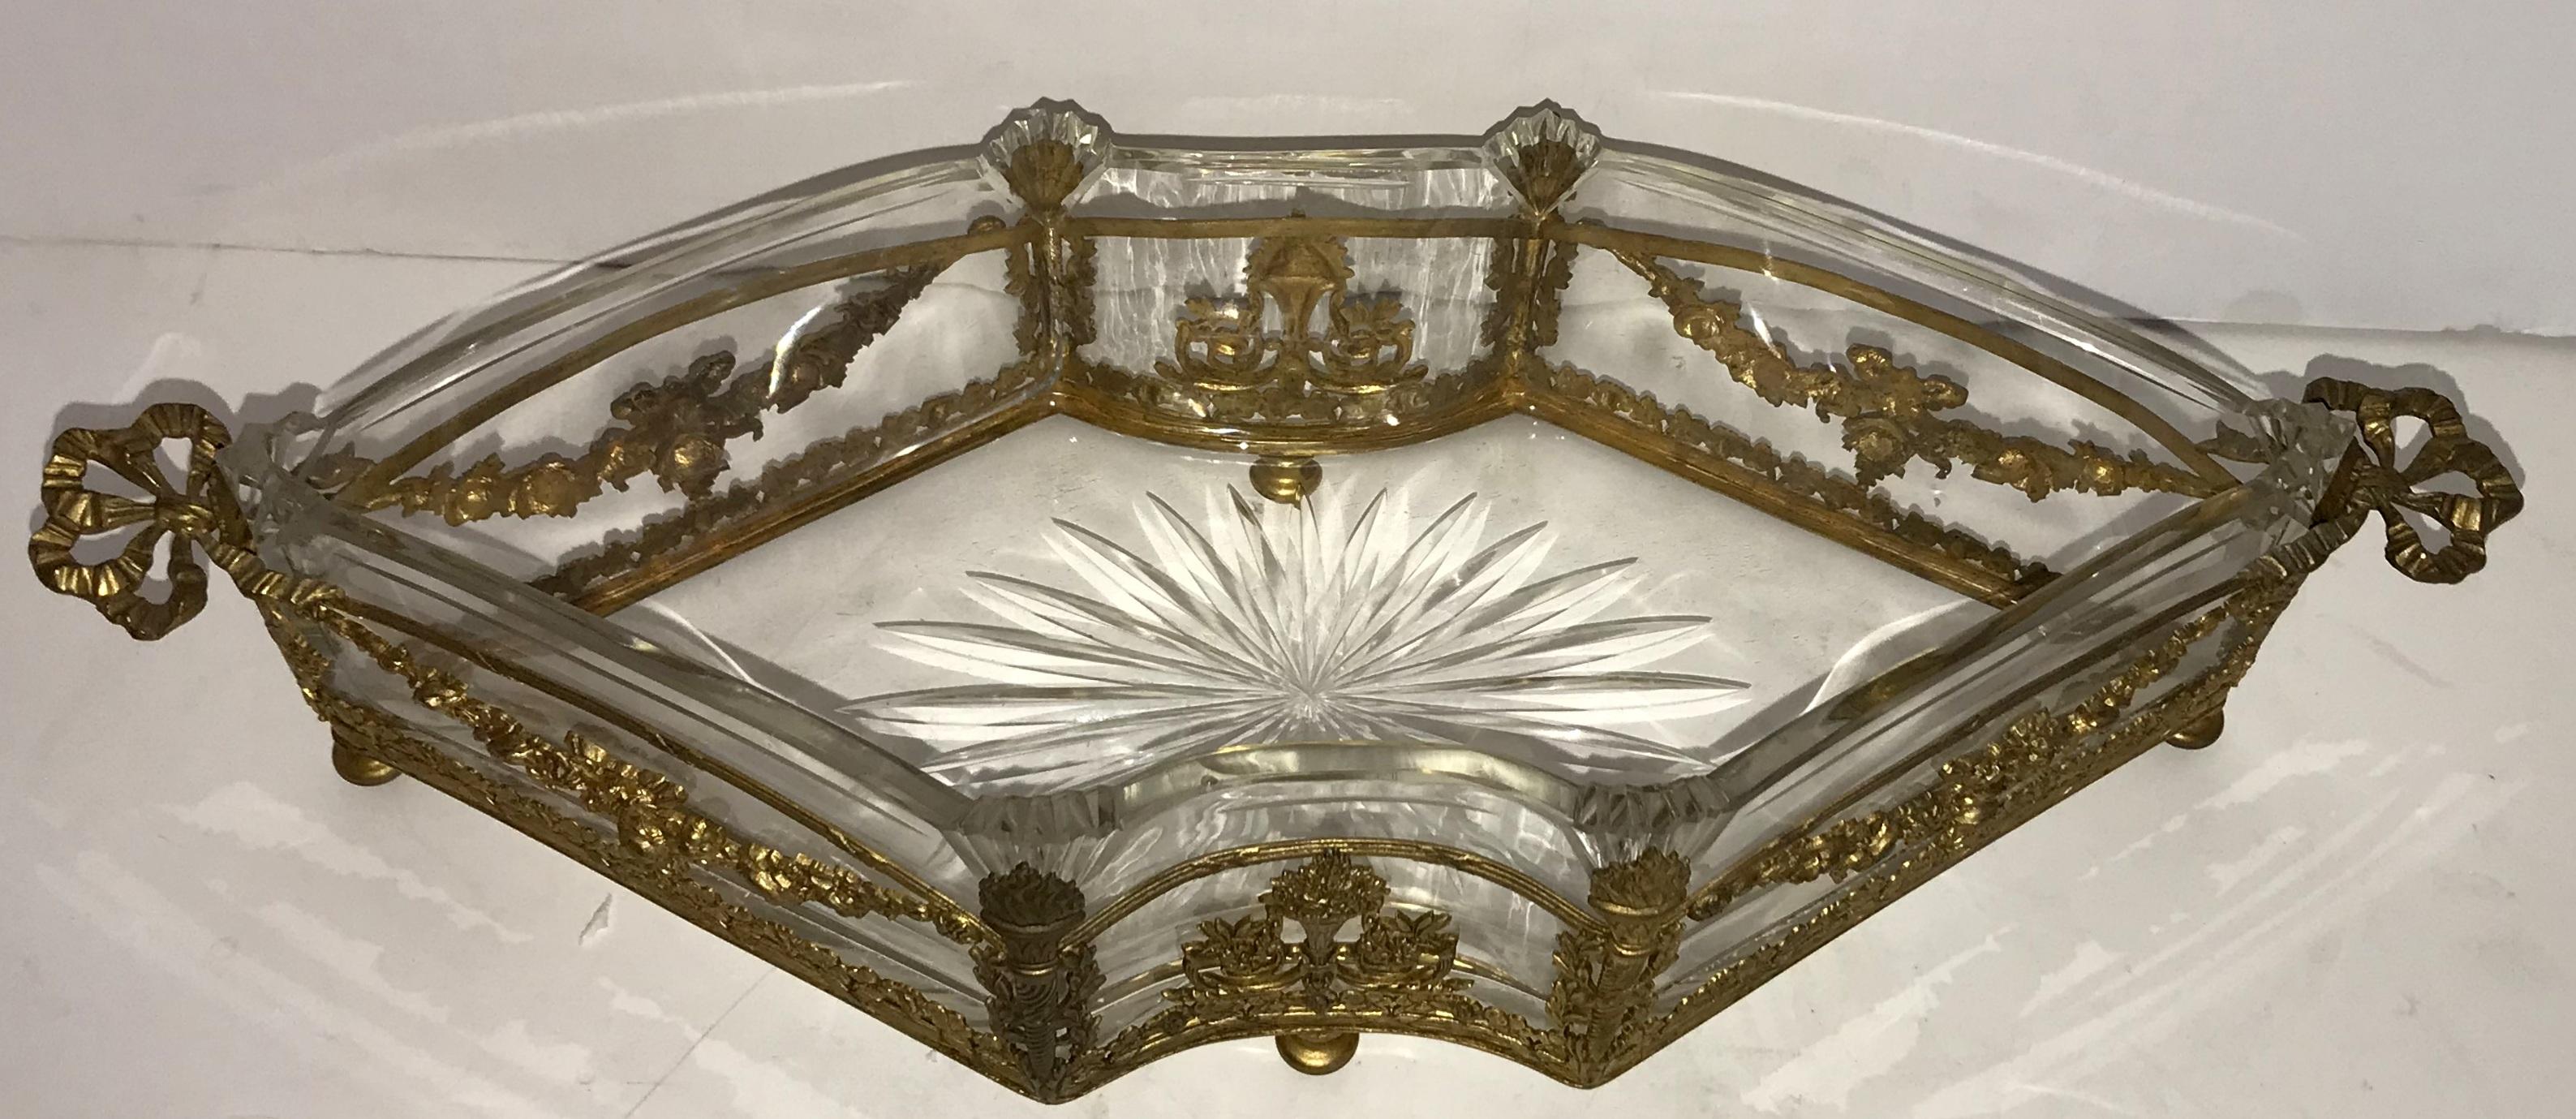 A wonderful very fine French doré bronze and etched cut crystal centerpiece / jardinière with swags, bows and torches.
Believed to be baccarat, unsigned.